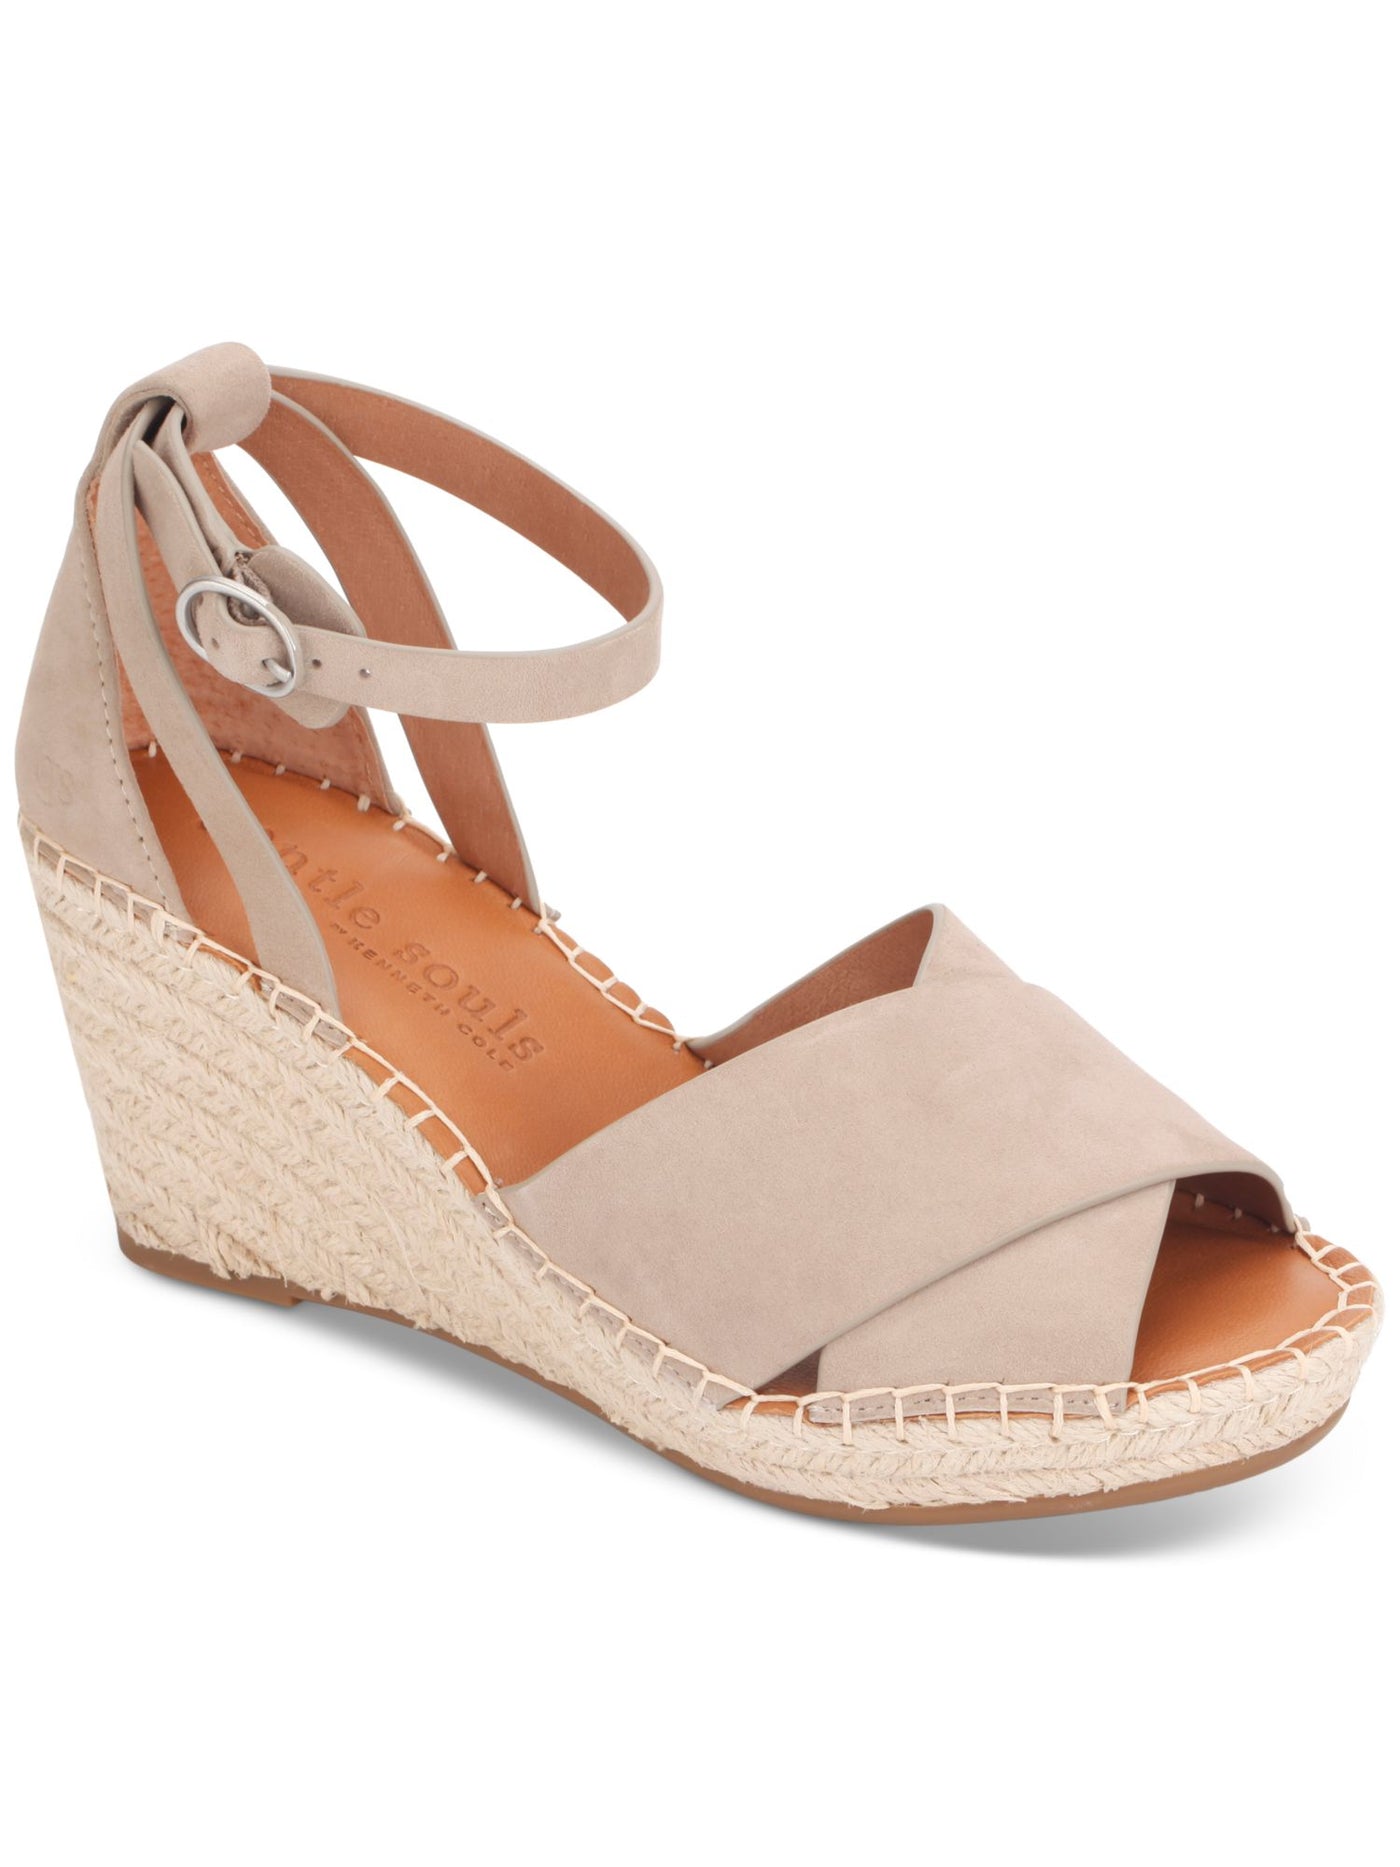 GENTLE SOULS KENNETH COLE Womens Beige Adjustable Ankle Strap Charli Peep Toe Wedge Buckle Leather Espadrille Shoes 11 M